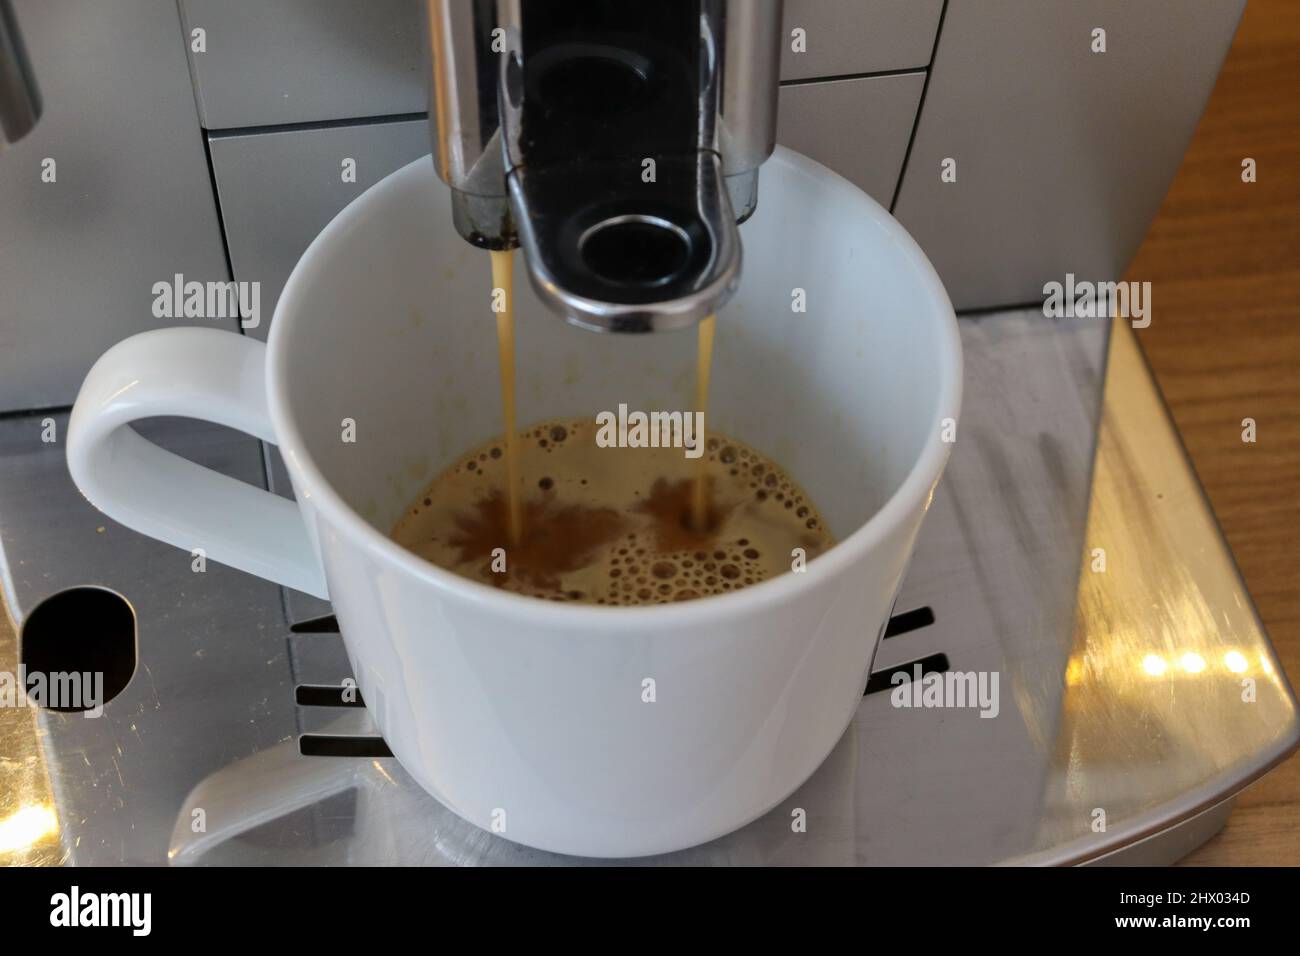 https://c8.alamy.com/comp/2HX034D/bean-to-cup-coffee-machine-pouring-fresh-coffee-in-to-white-cup-with-crema-2HX034D.jpg